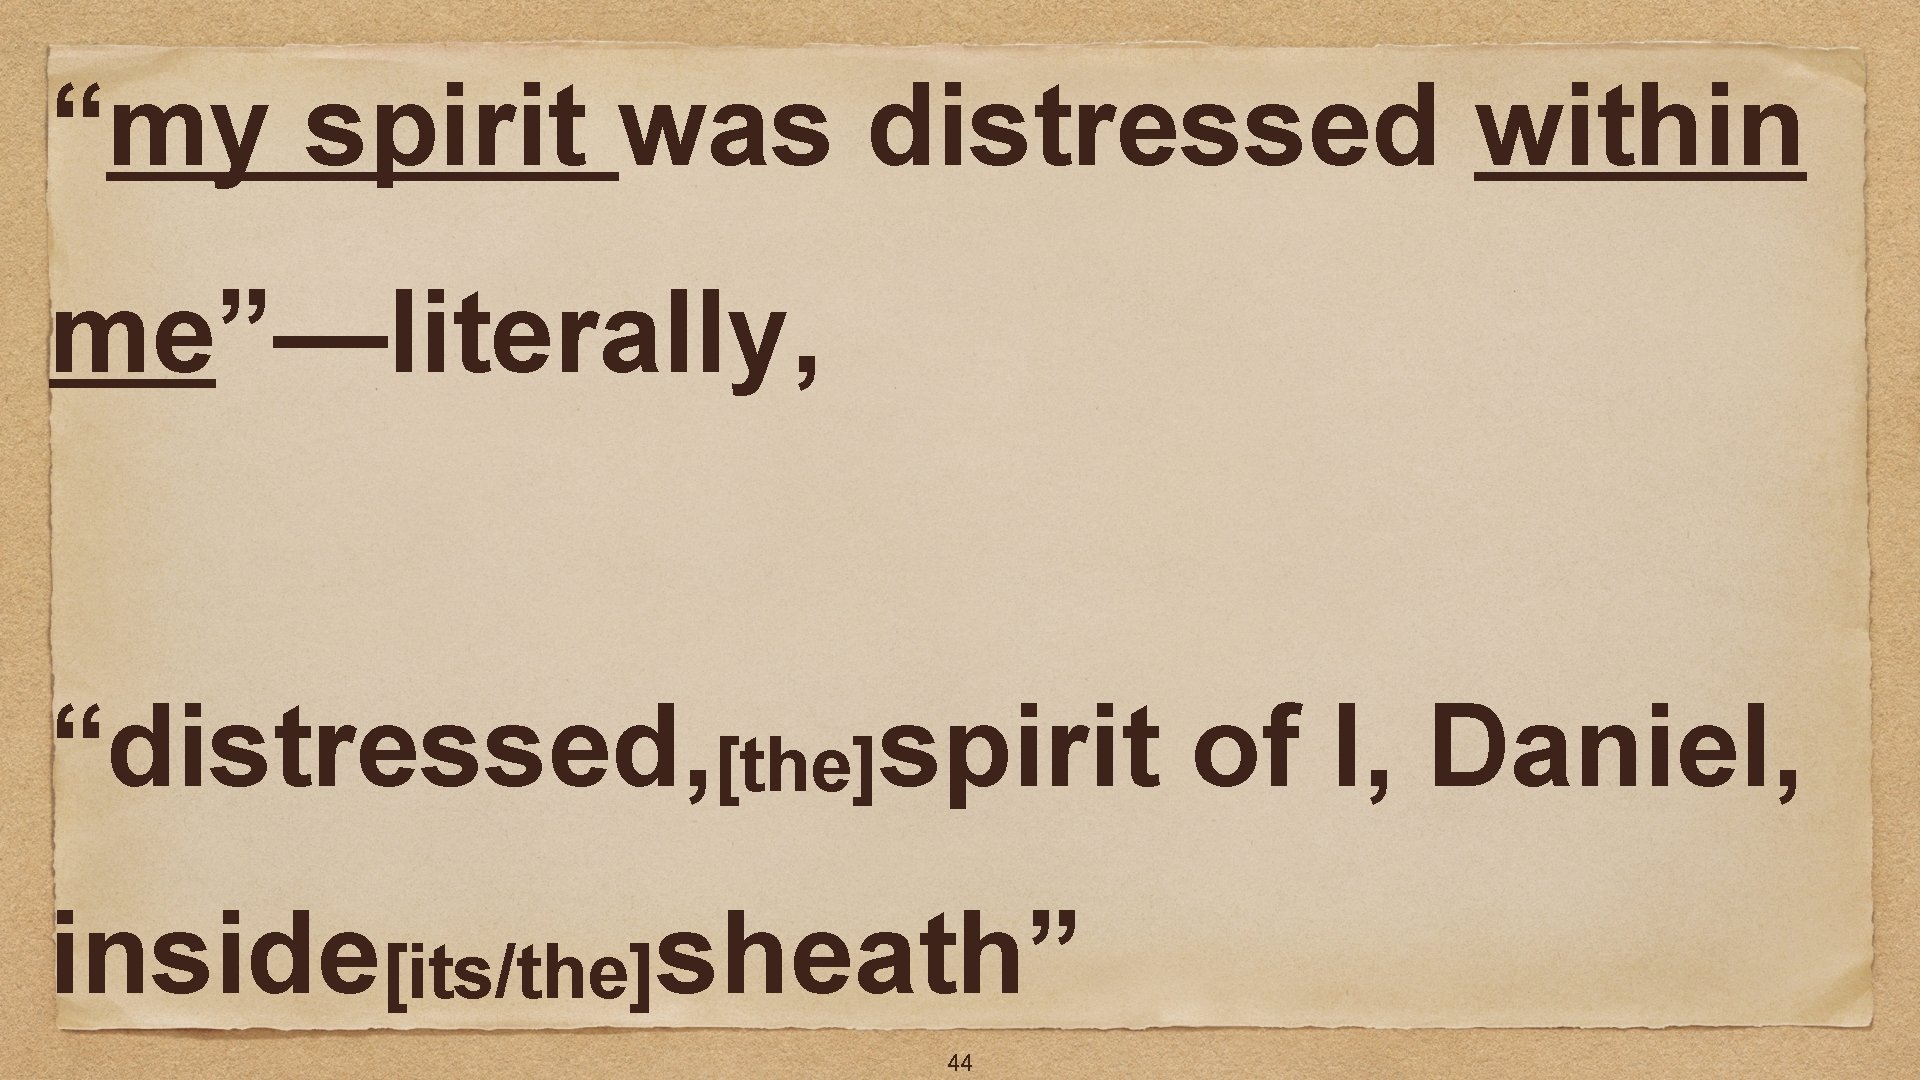 “my spirit was distressed within me”—literally, “distressed, [the]spirit of I, Daniel, inside[its/the]sheath” 44 